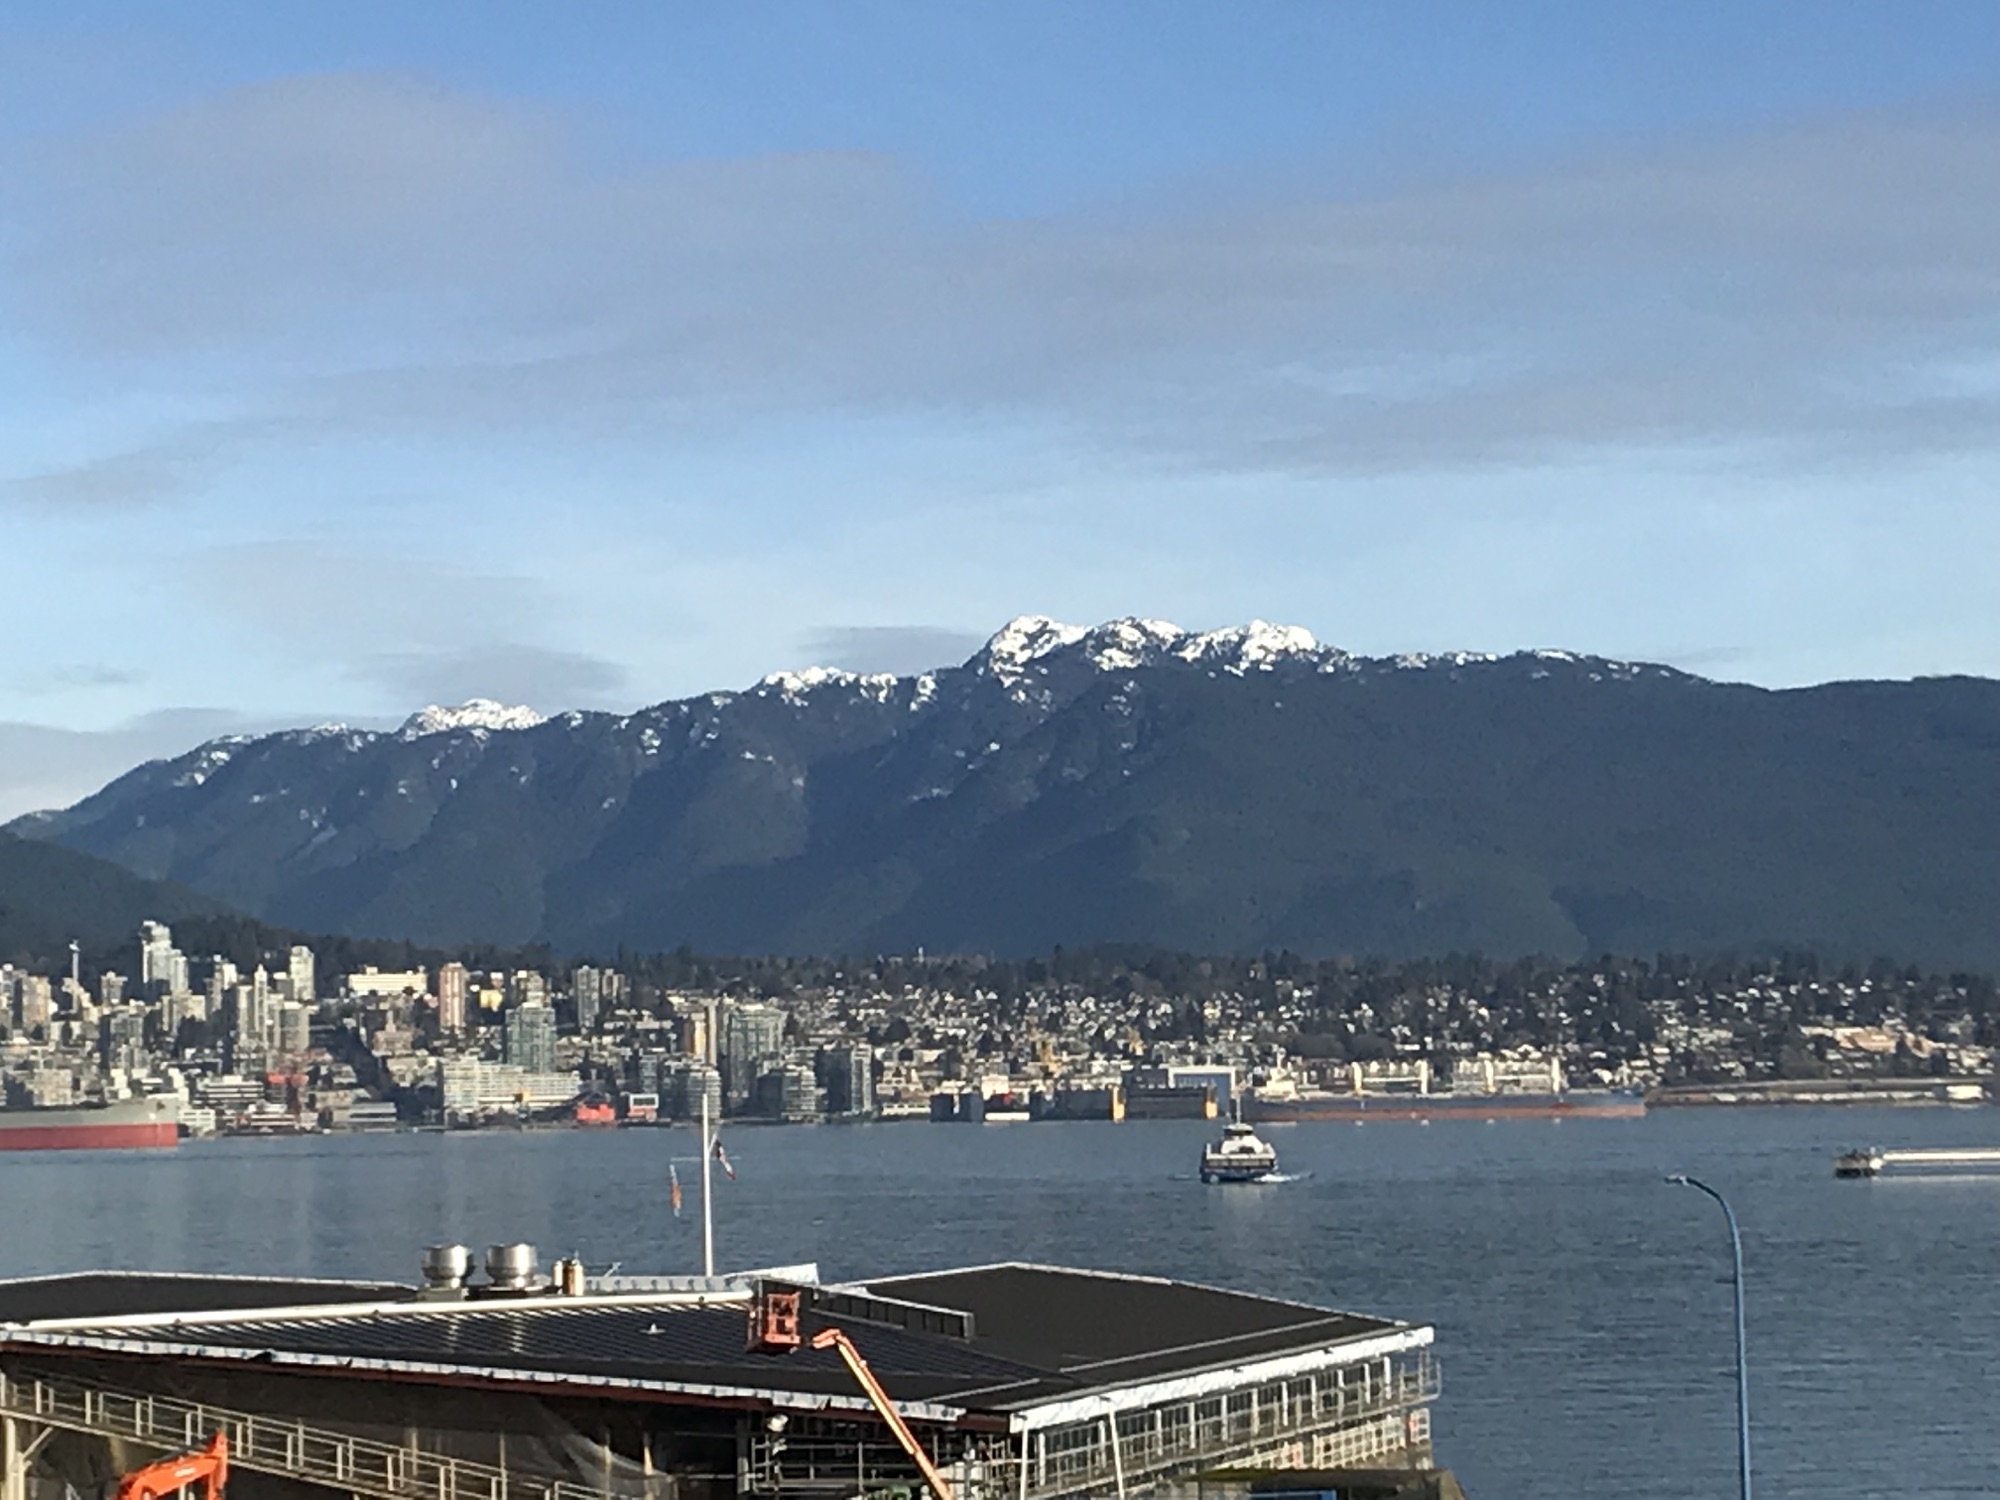 The mountains behind Noerh Vancouver